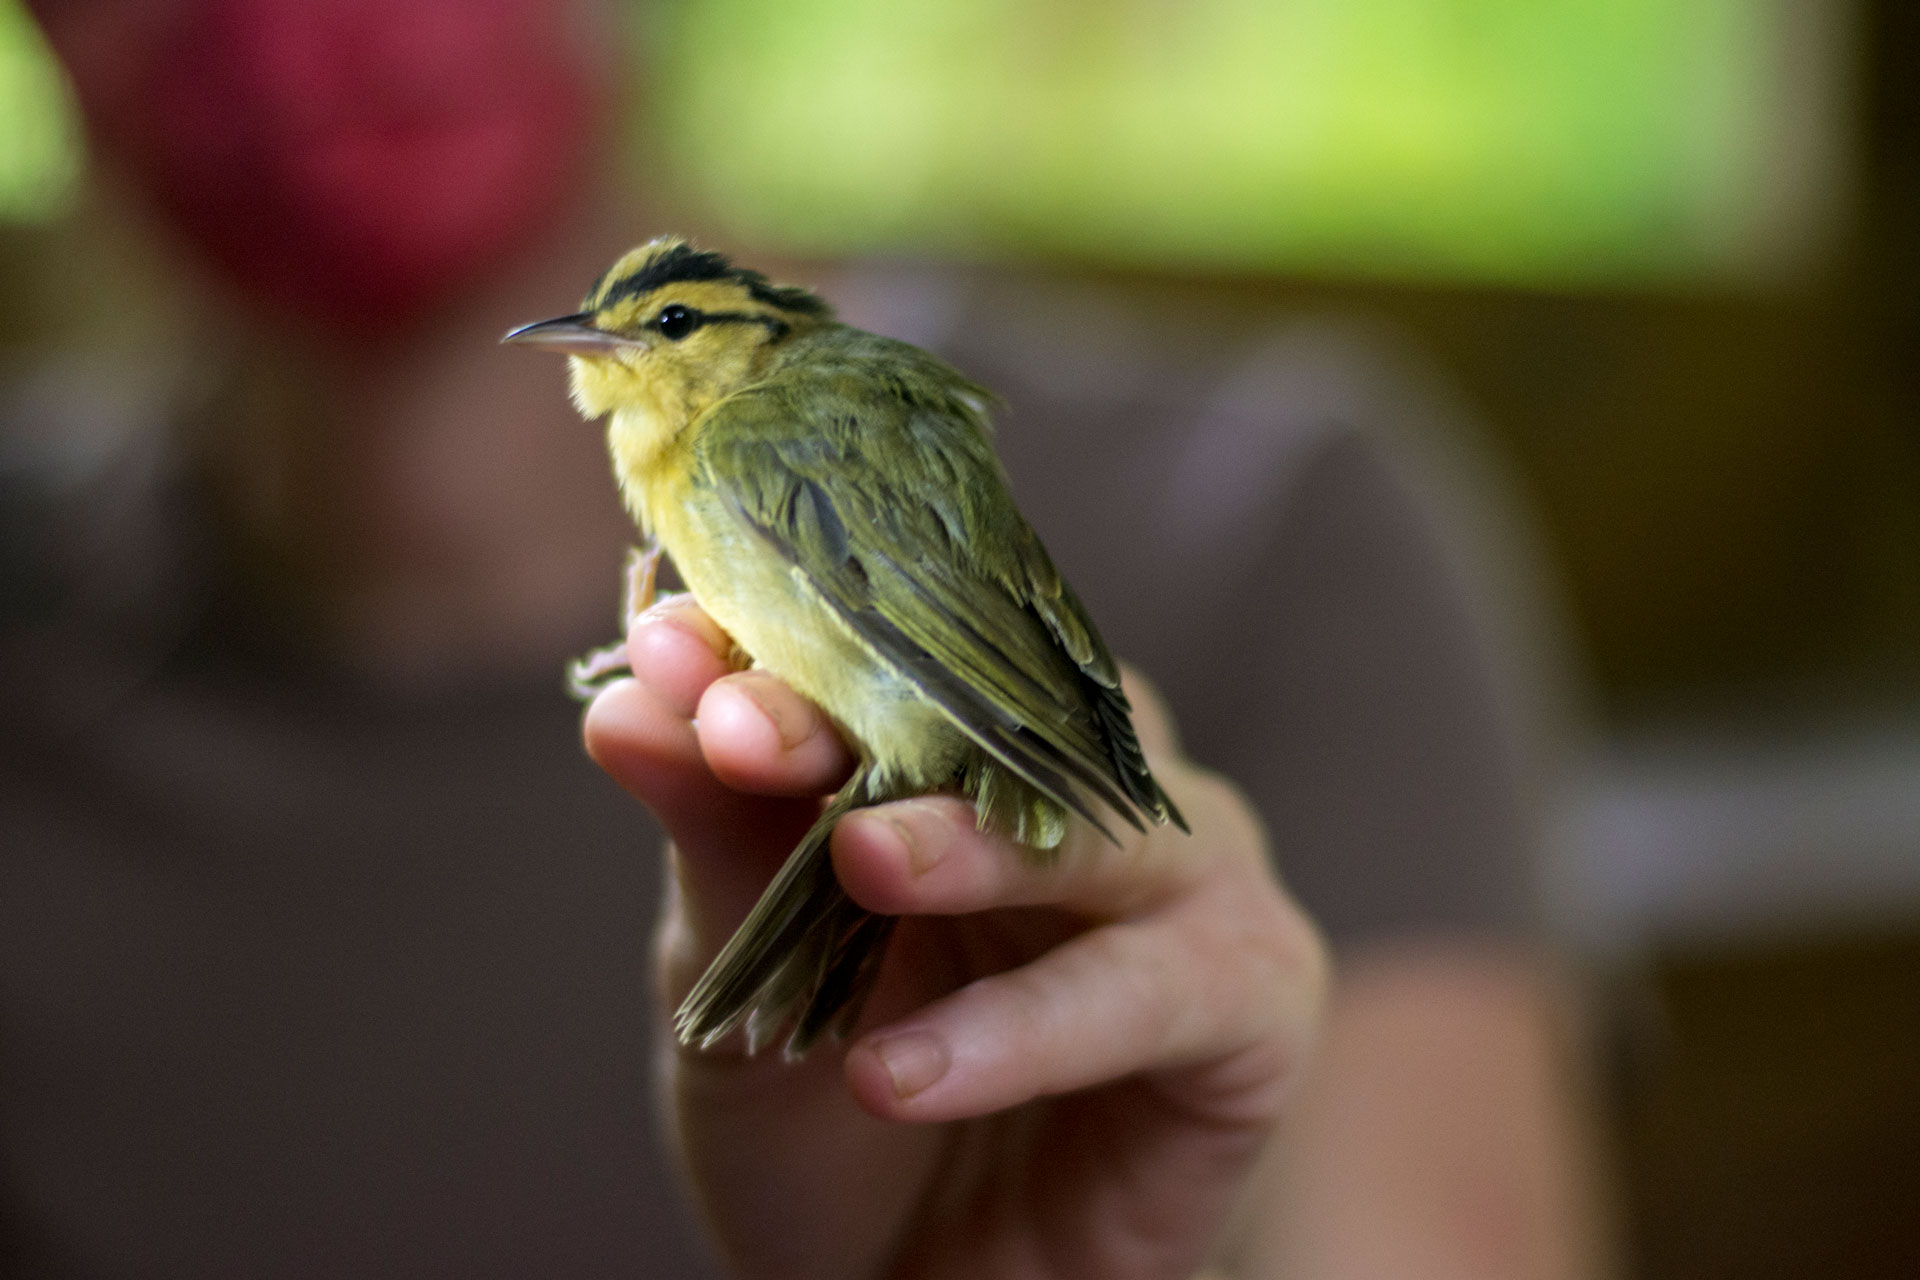 A Worm-eating Warbler in the photographer's grip during community science bird banding at Tremont Institute